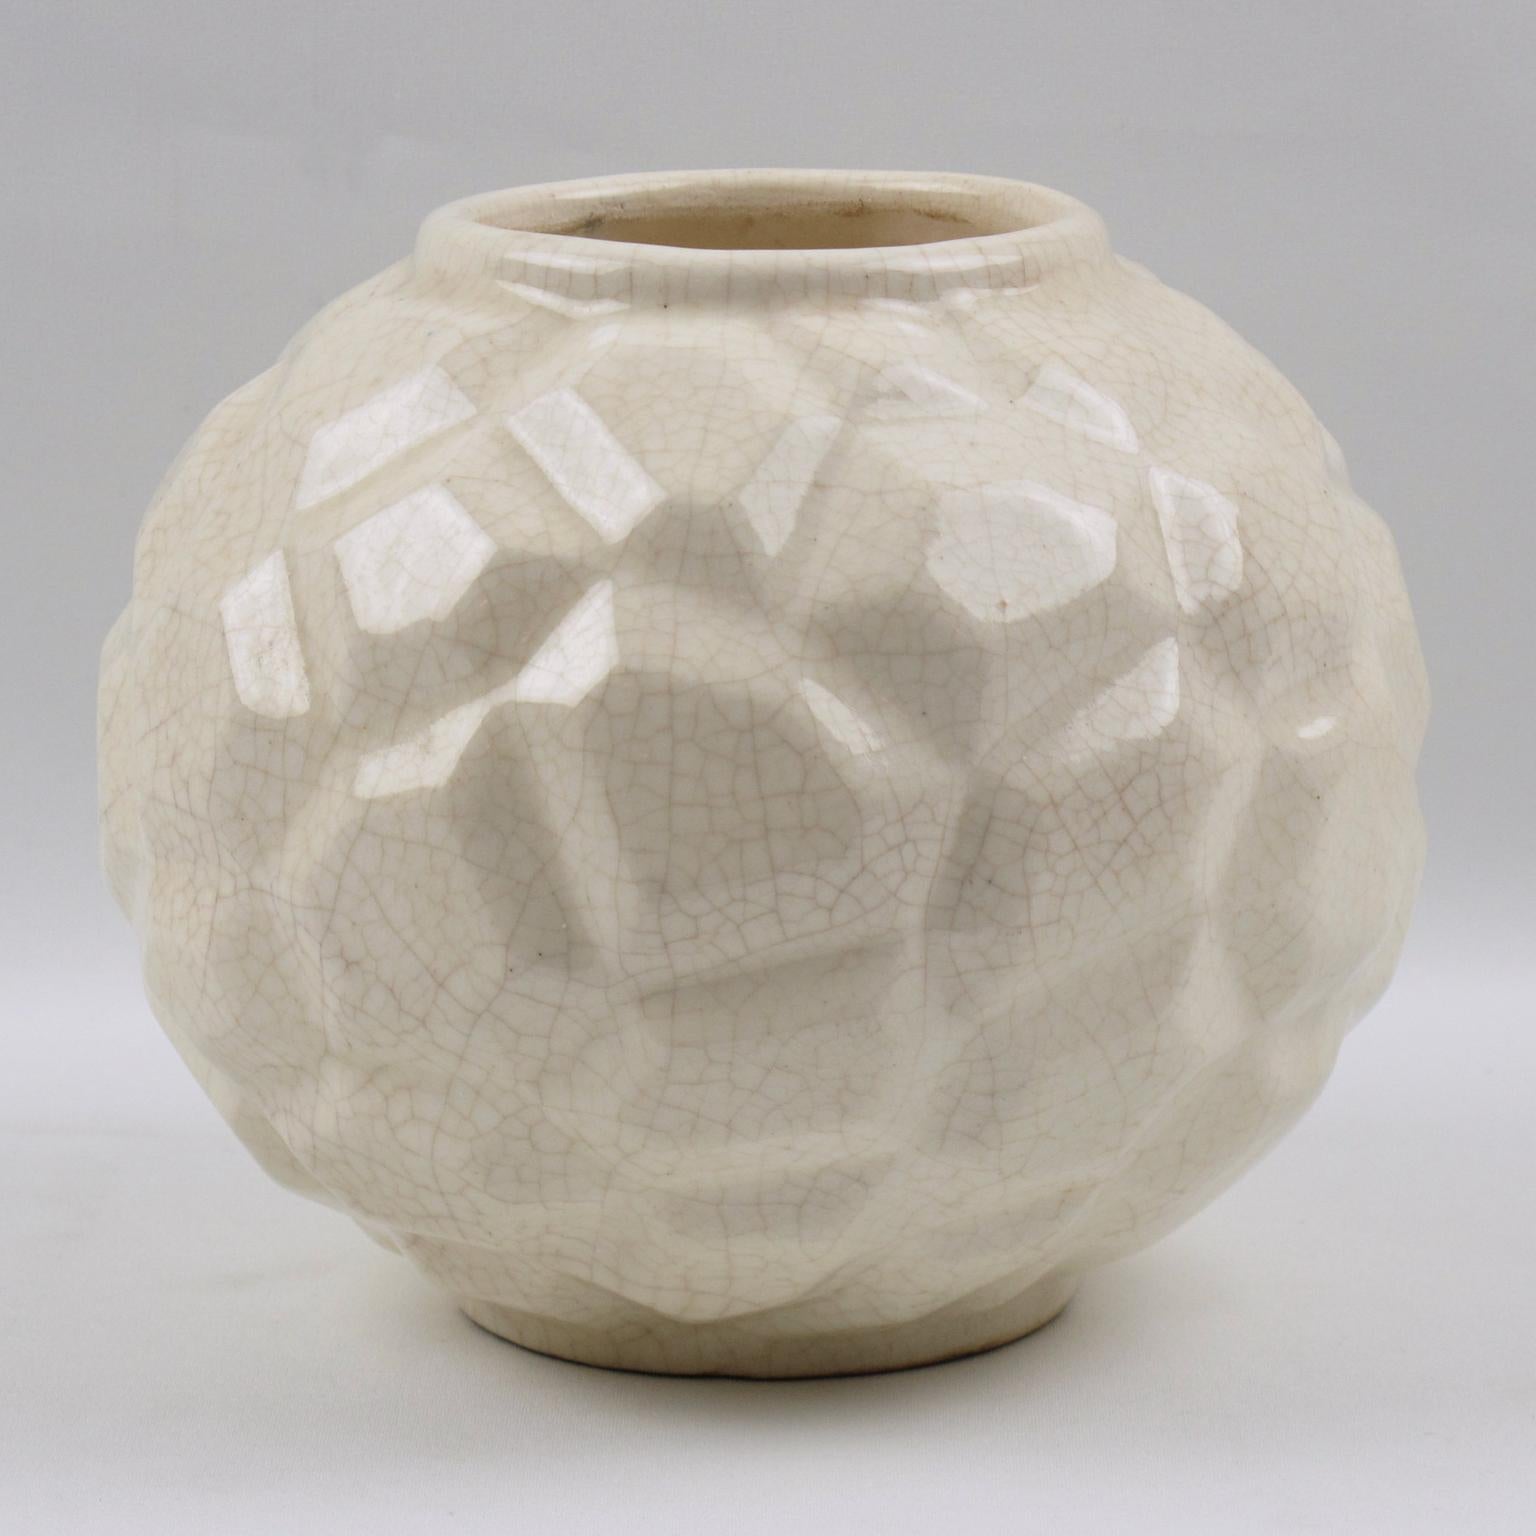 Lovely Art Deco vase by Faience Factory Saint Clement, France. French ceramic vase with white crackle glaze finish. Features a large puffy round shape with large collar opening and detailed stylized carving with geometric shape all around.
The